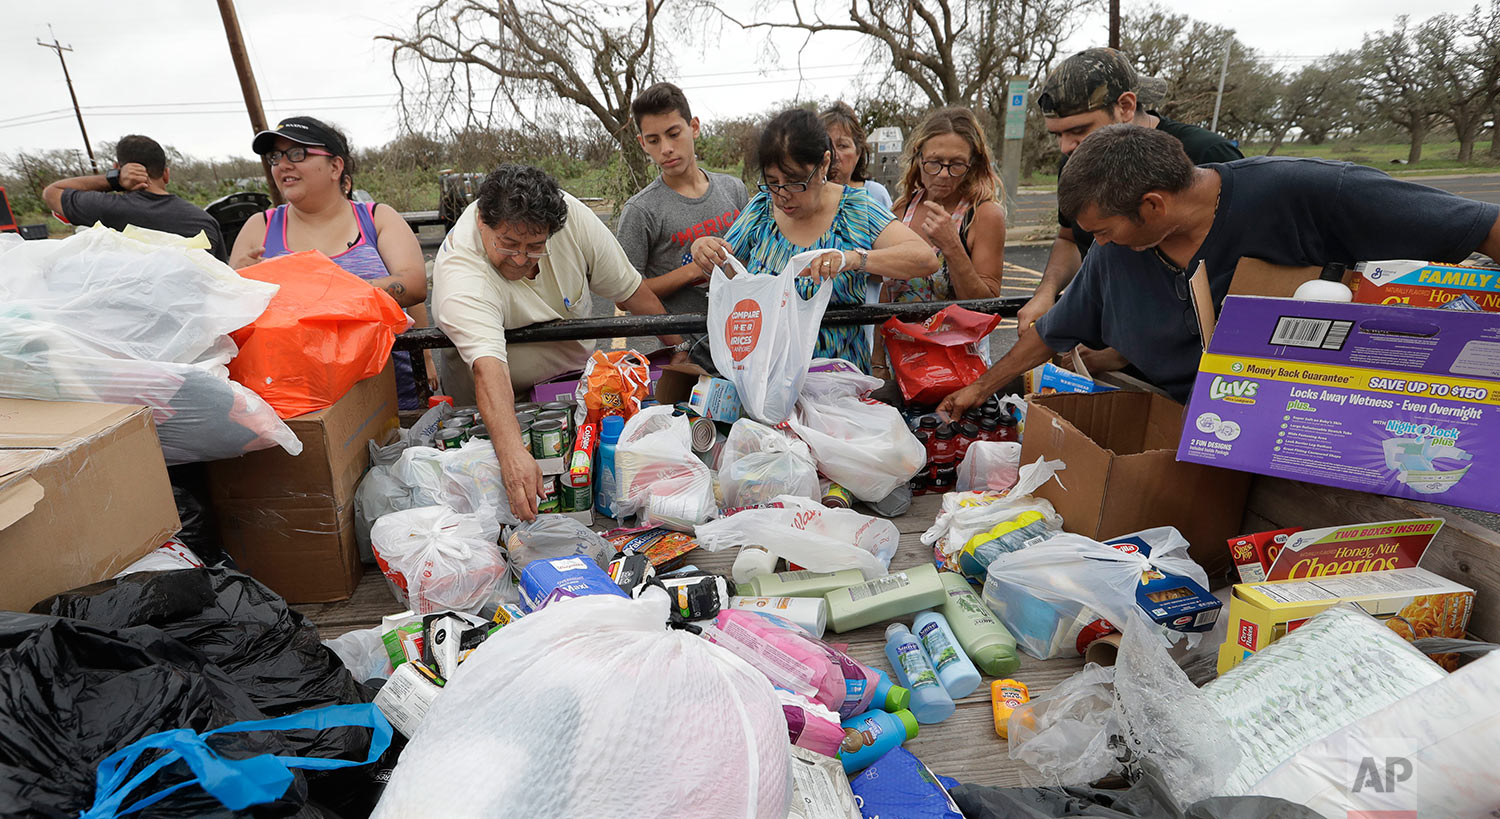 Residents pick through needed items at a make-shift aid station, Sunday, Aug. 27, 2017, in Rockport, Texas. A group from the Texas Rio Grande Valley created the station for those in need following Hurricane Harvey. (AP Photo/Eric Gay)